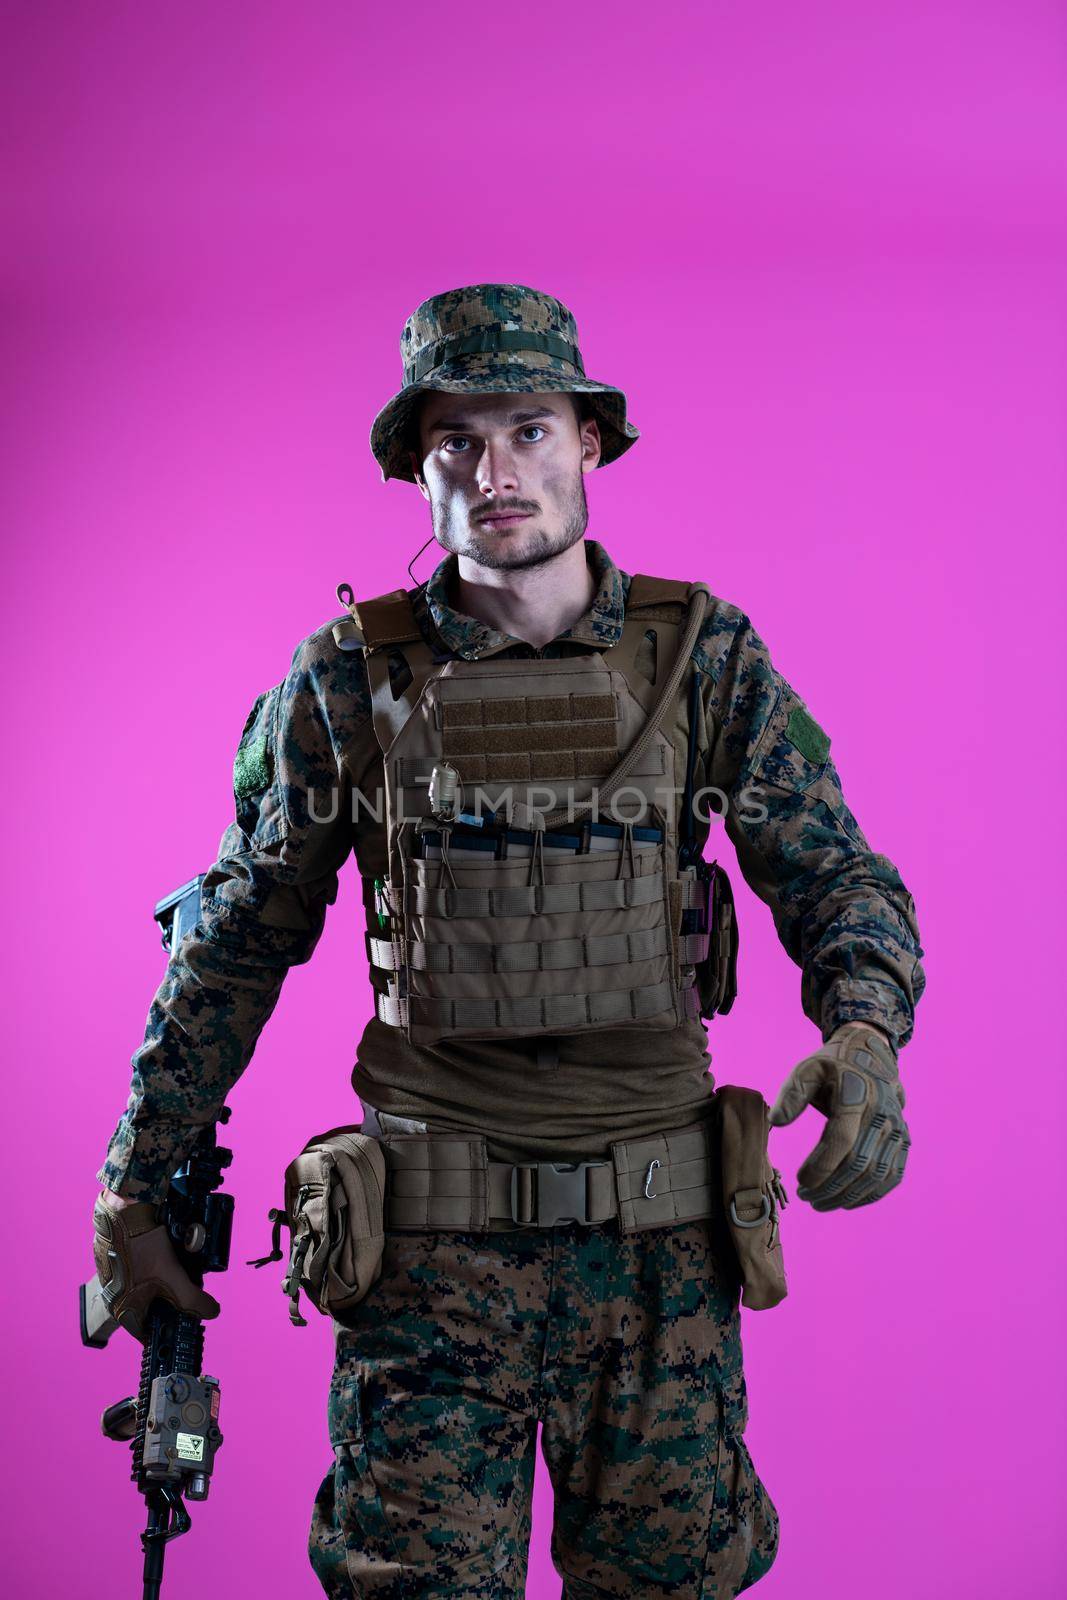 american  marine corps special operations modern warfare soldier with fire arm weapon and protective army tactical gear ready for battle on pink background